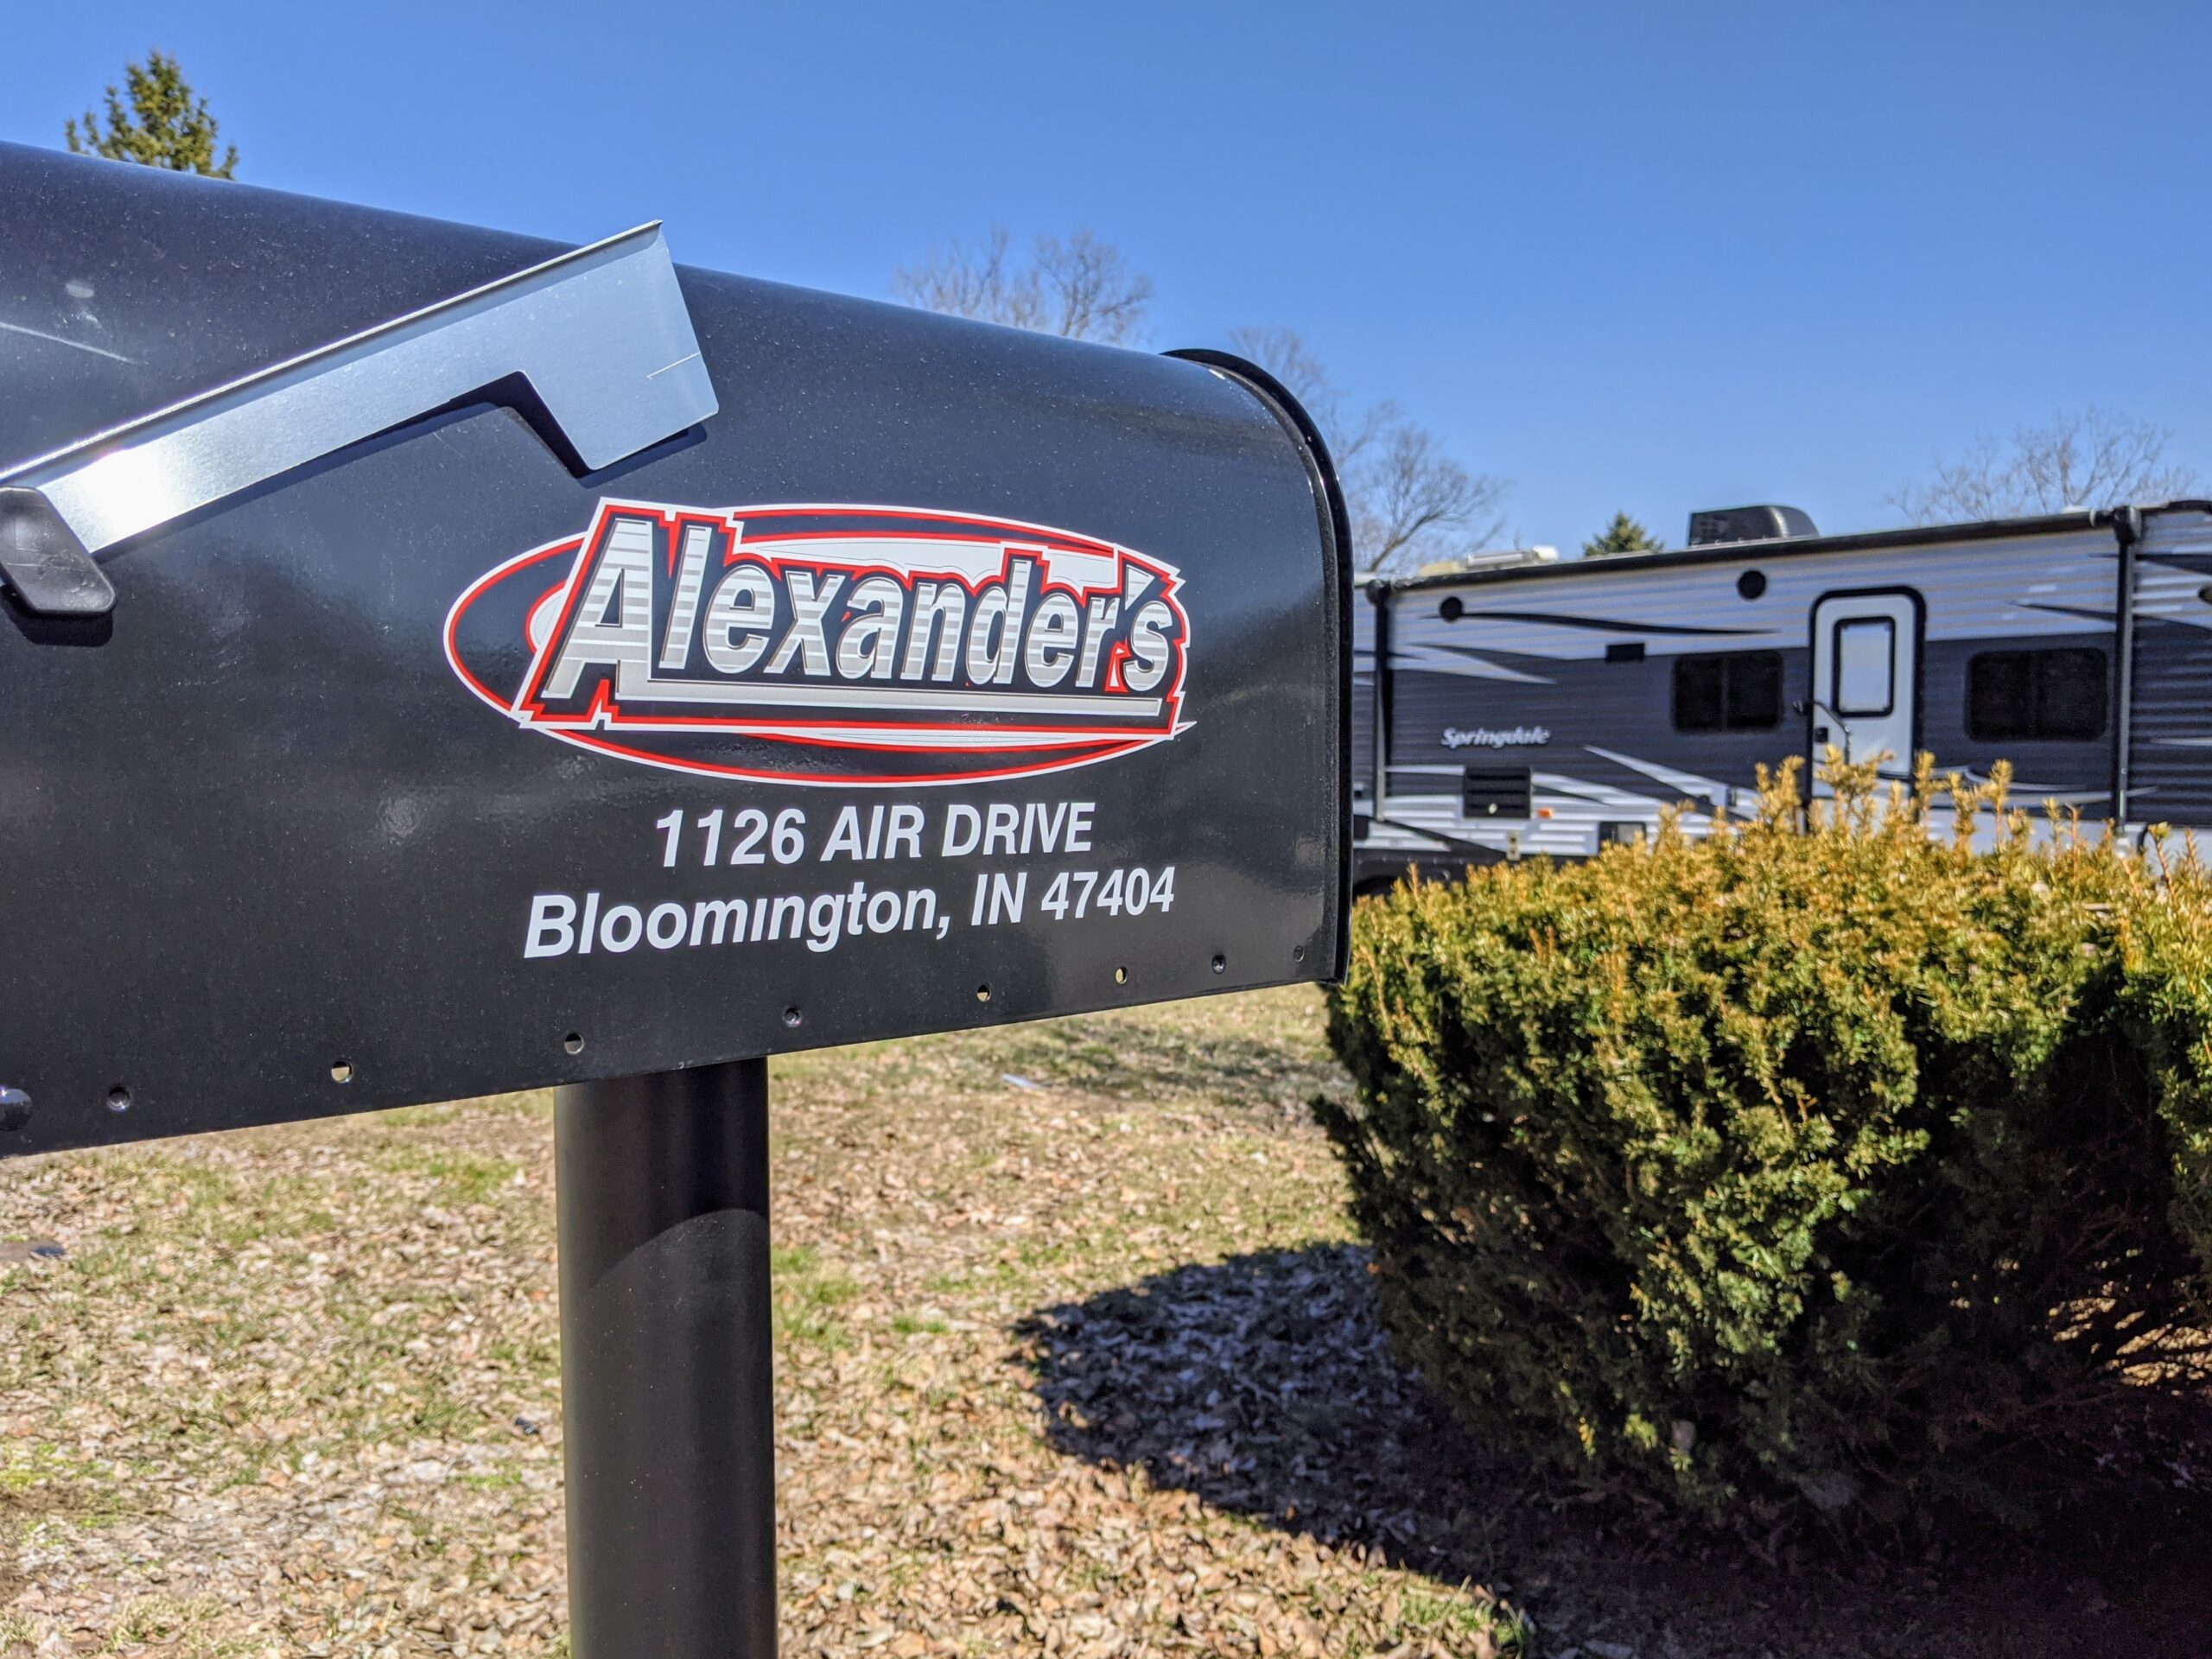 Alexander's RV is located at 1126 Air Drive on the west side of Bloomington